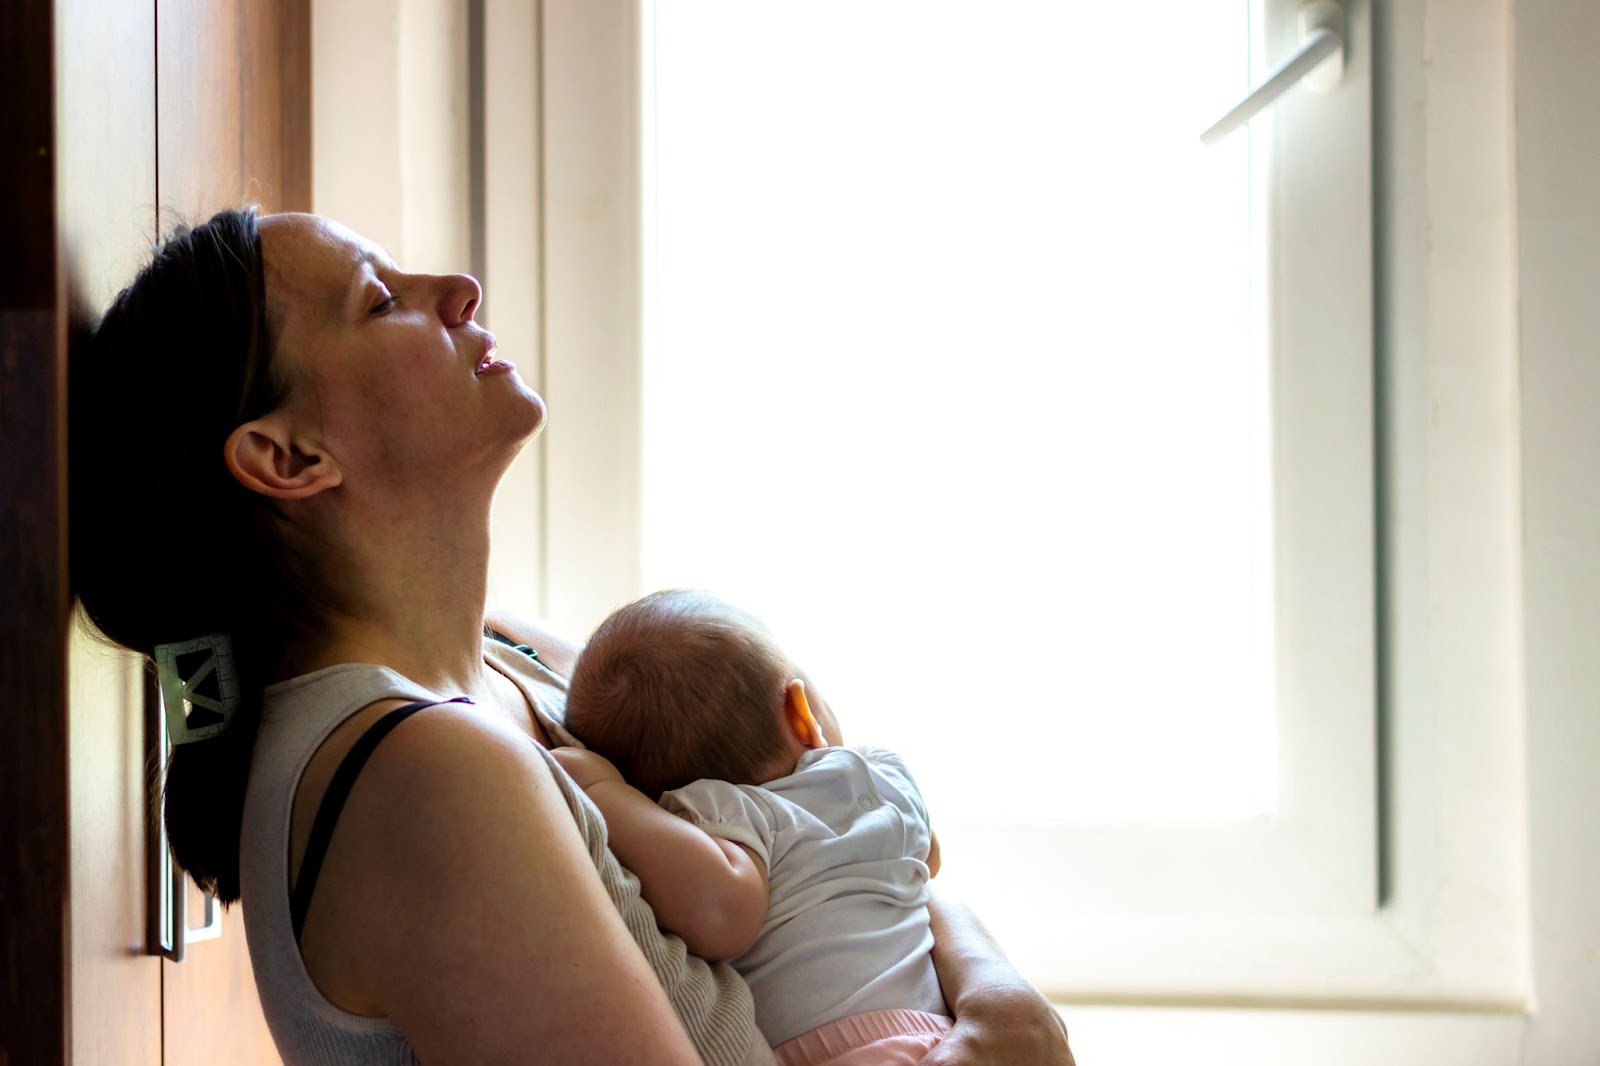 Mother cradling baby at window shows bond and postpartum challenges